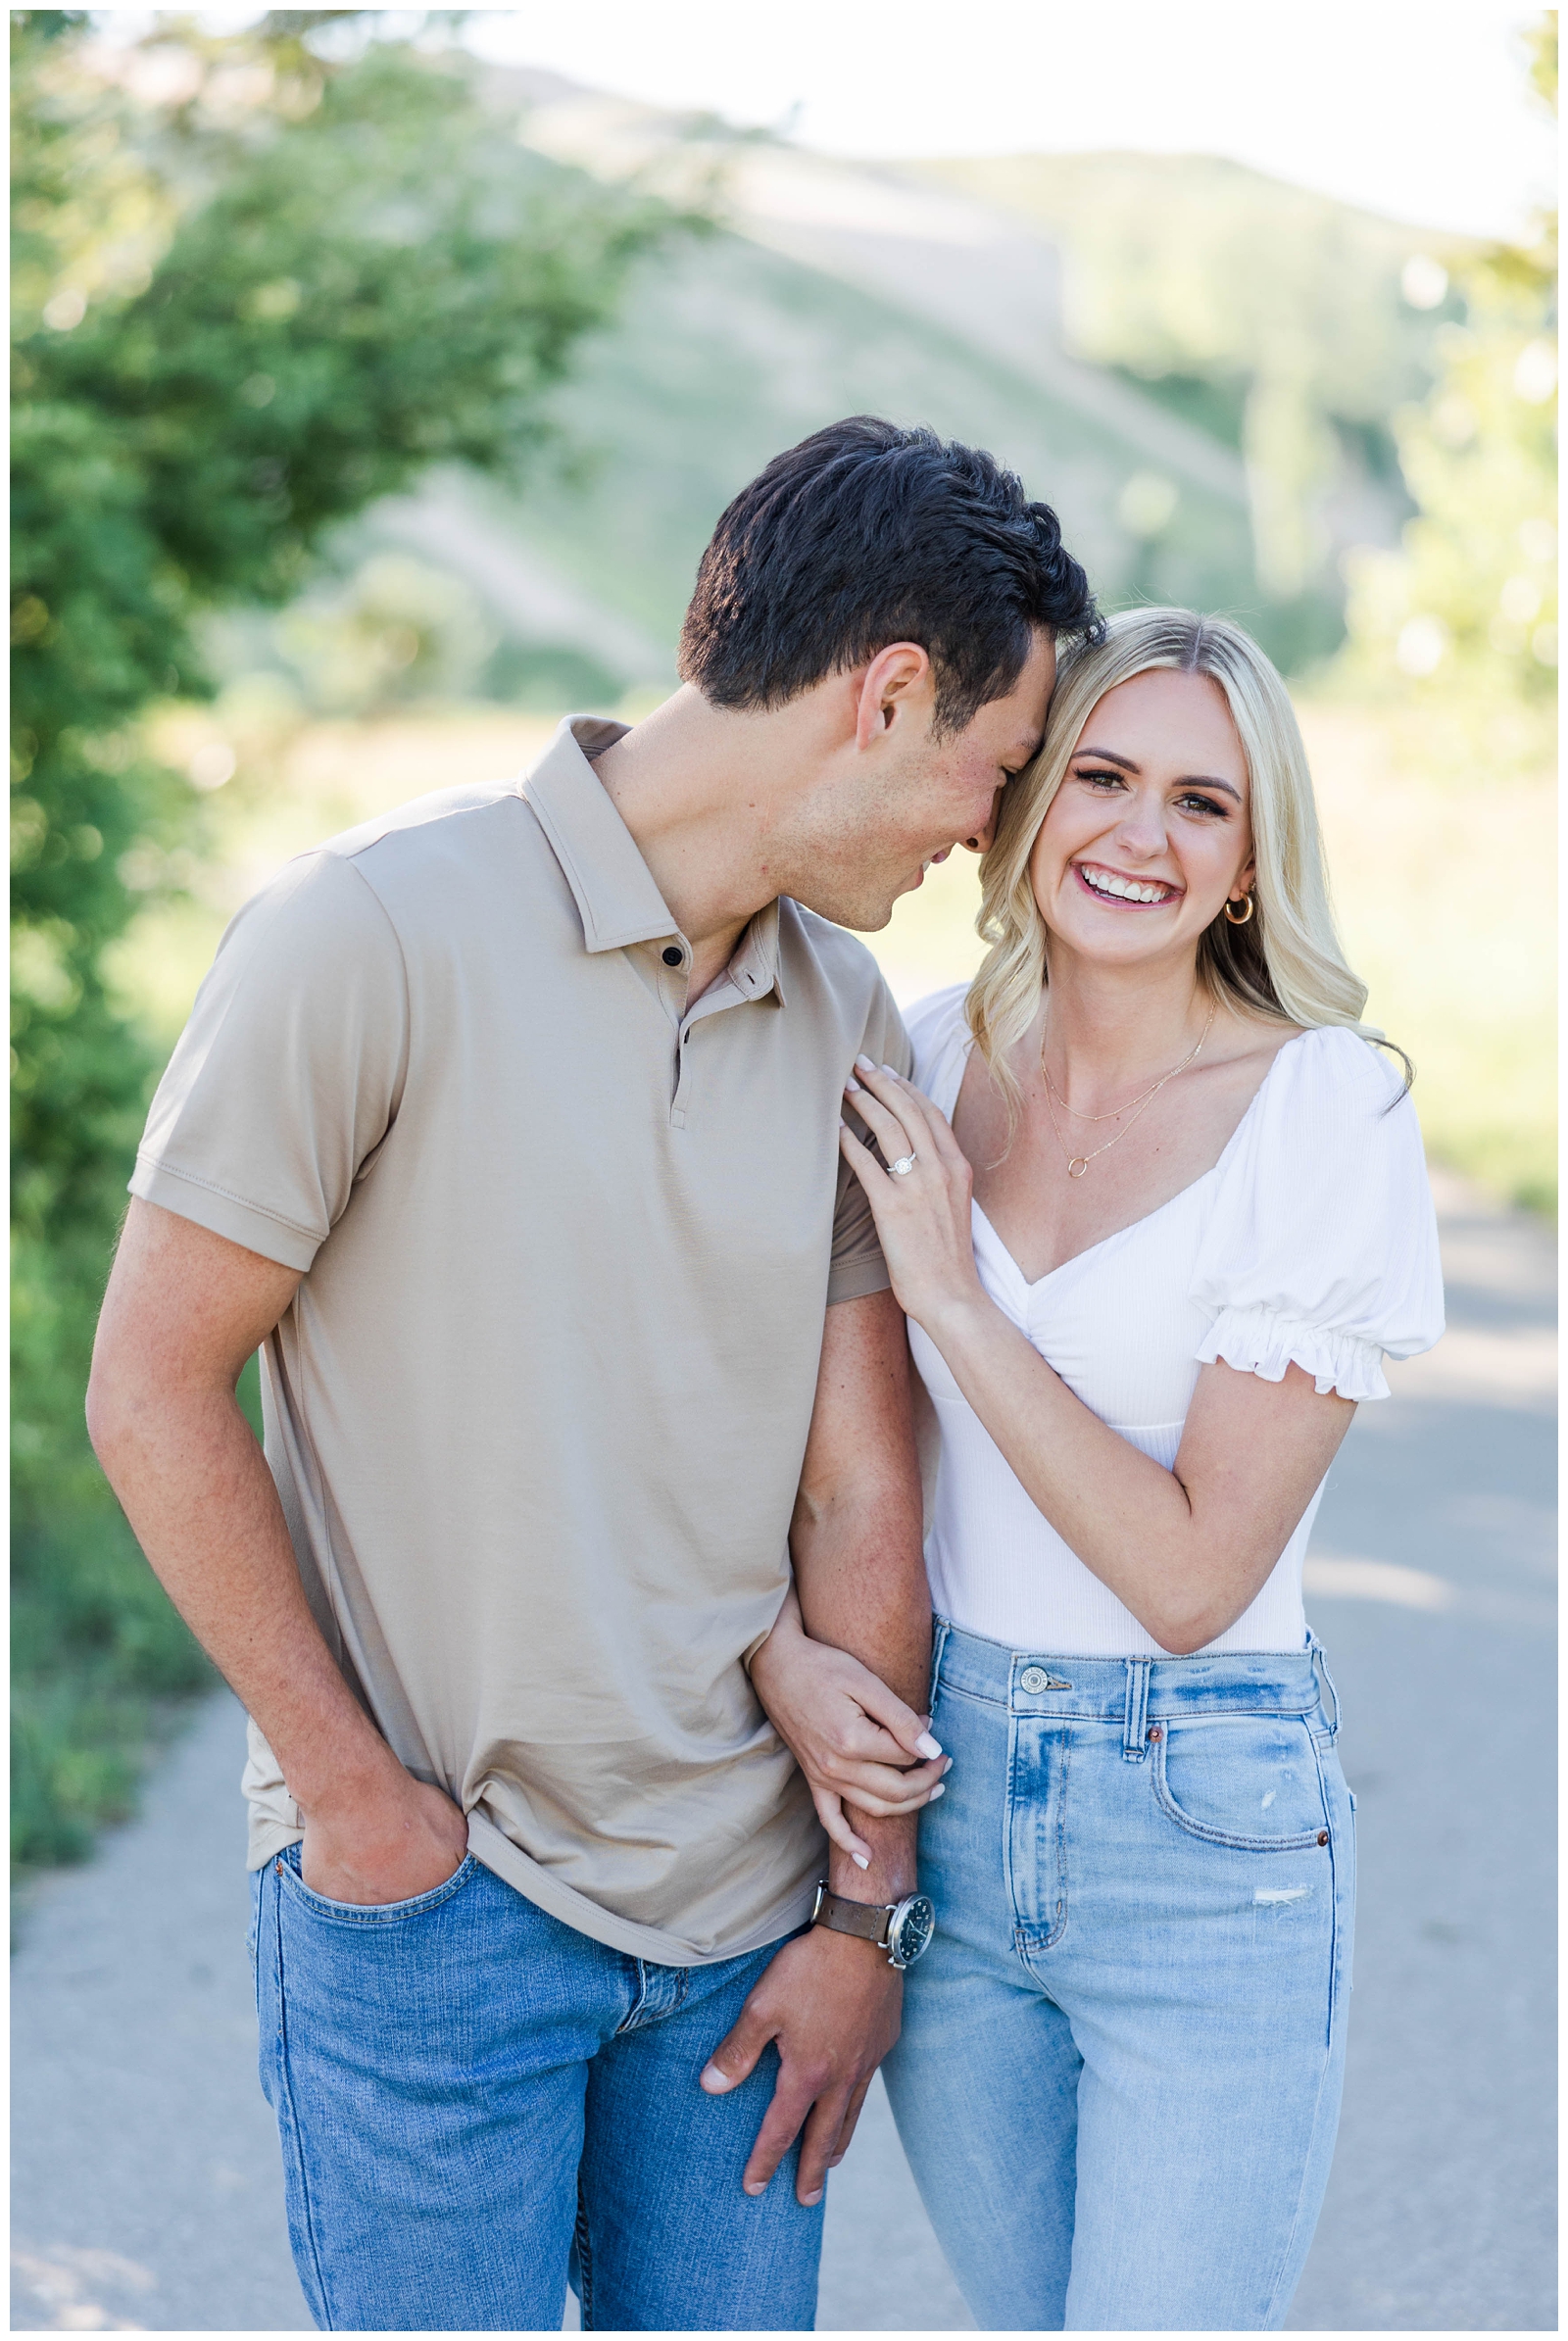 Summer engagement photo outfit inspiration